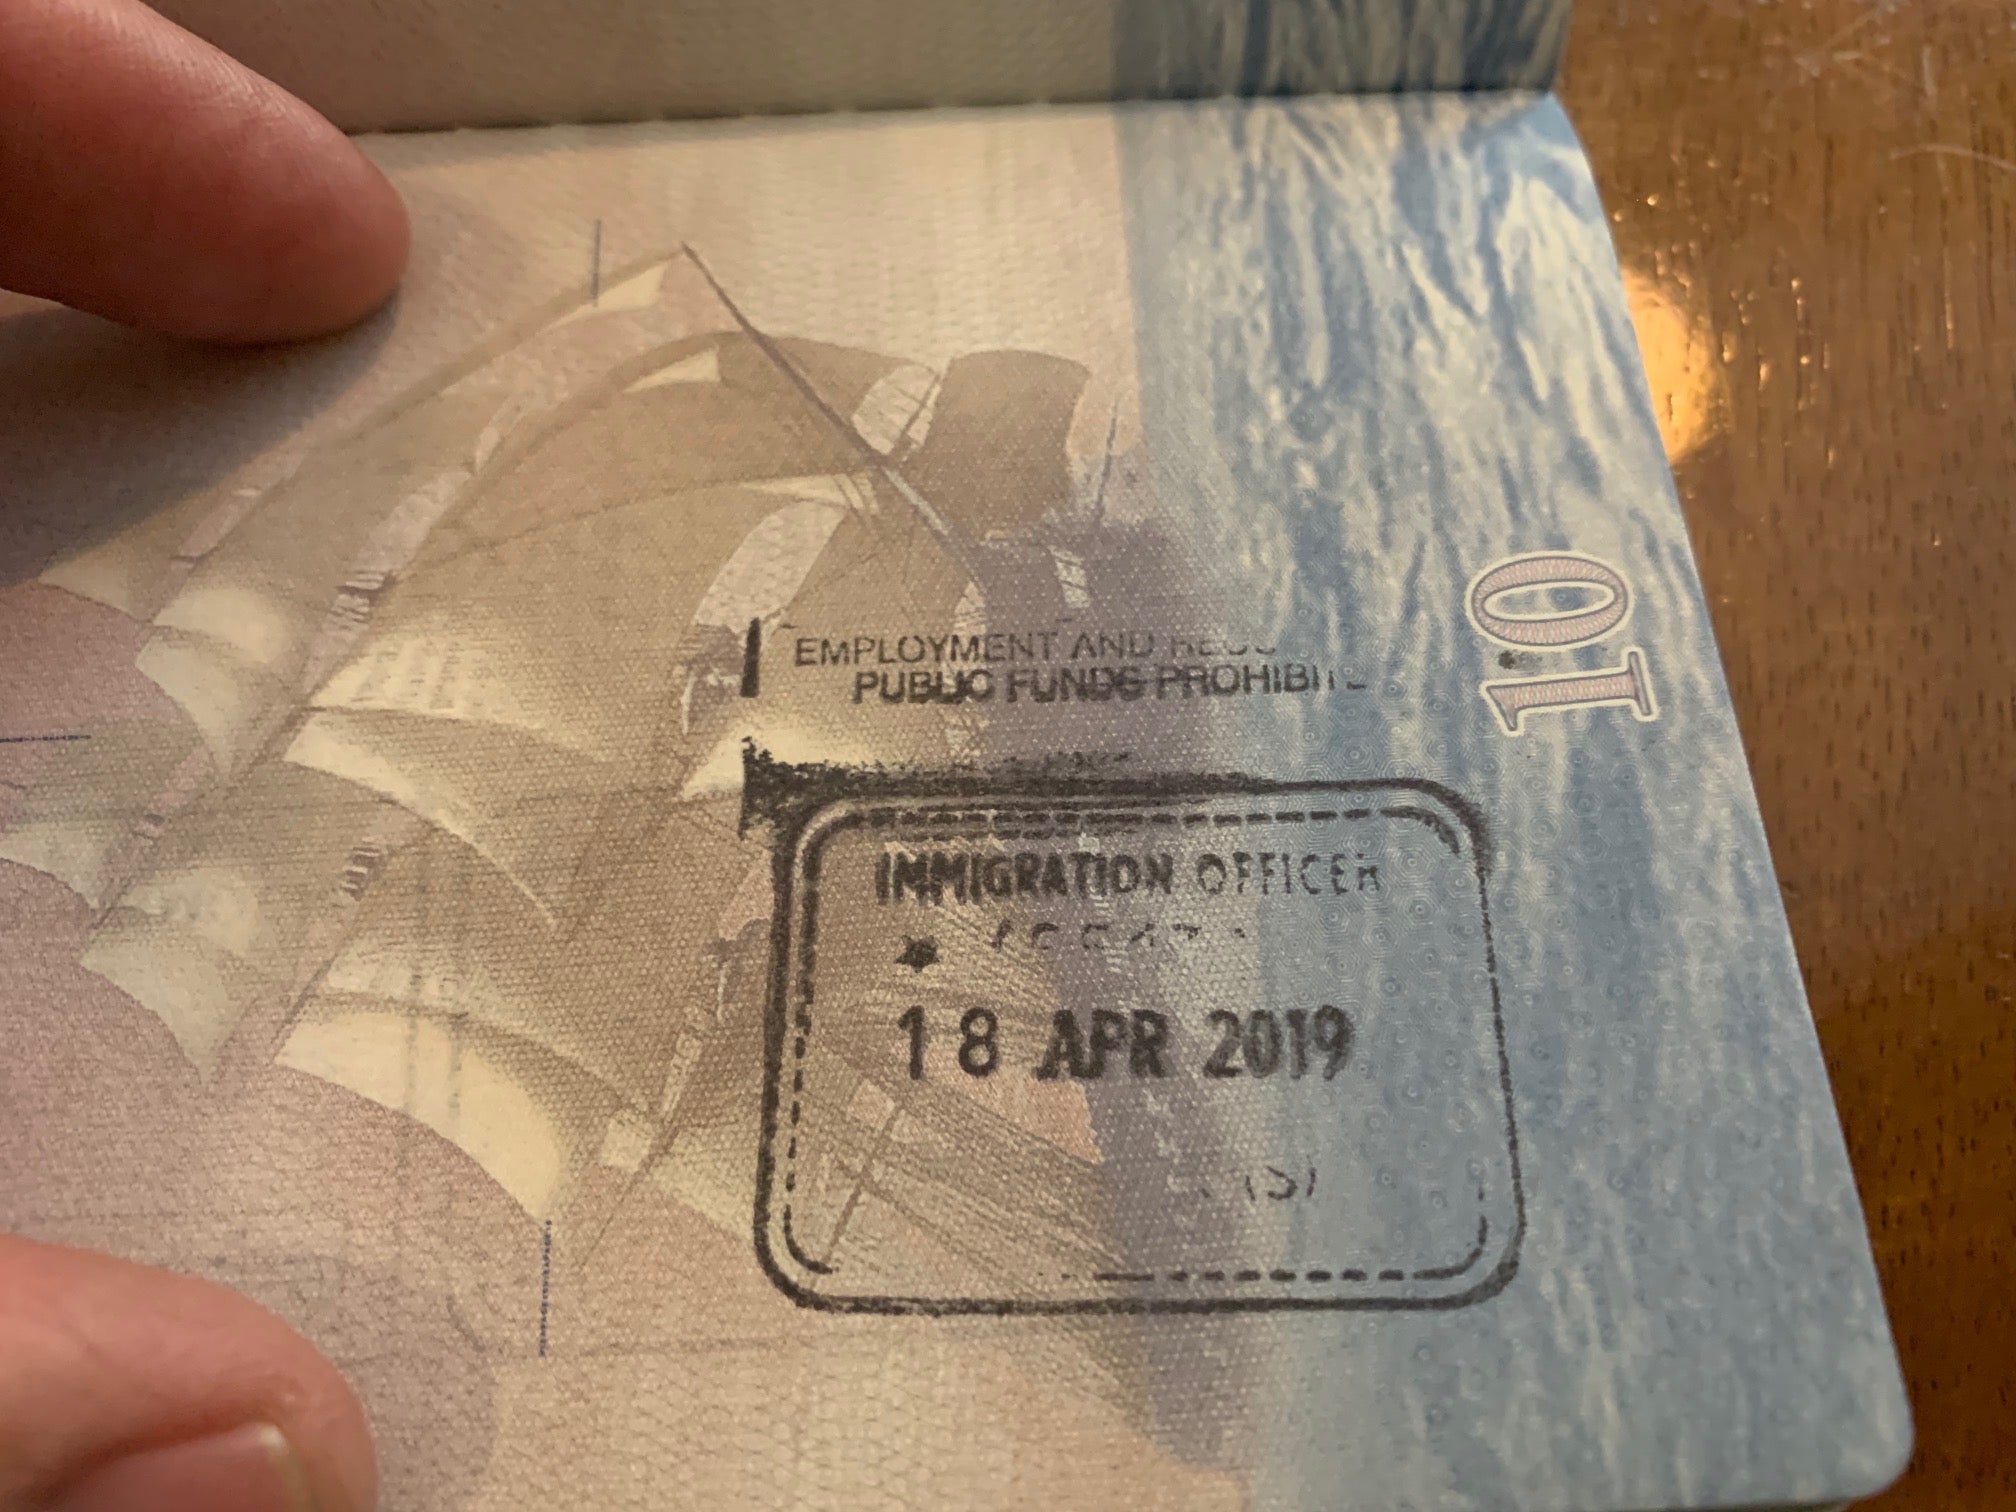 Border officials put a stamp in Viola’s passport indicating that she was on a six-month tourist visa and must not work or use public services